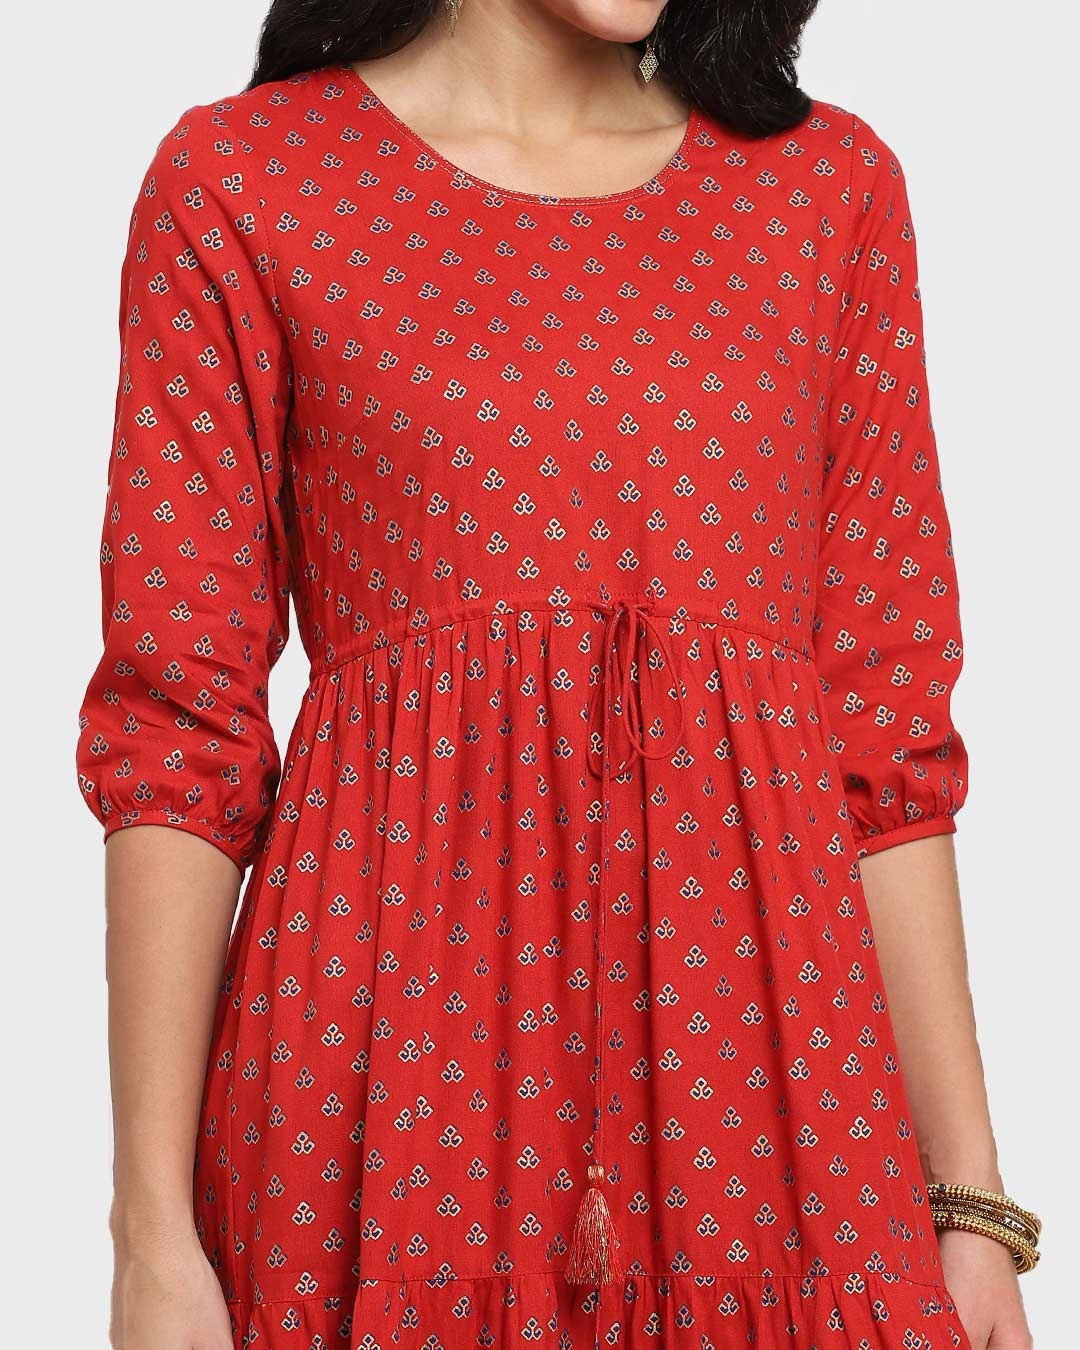 Shop Women's Printed Red Flared Dress